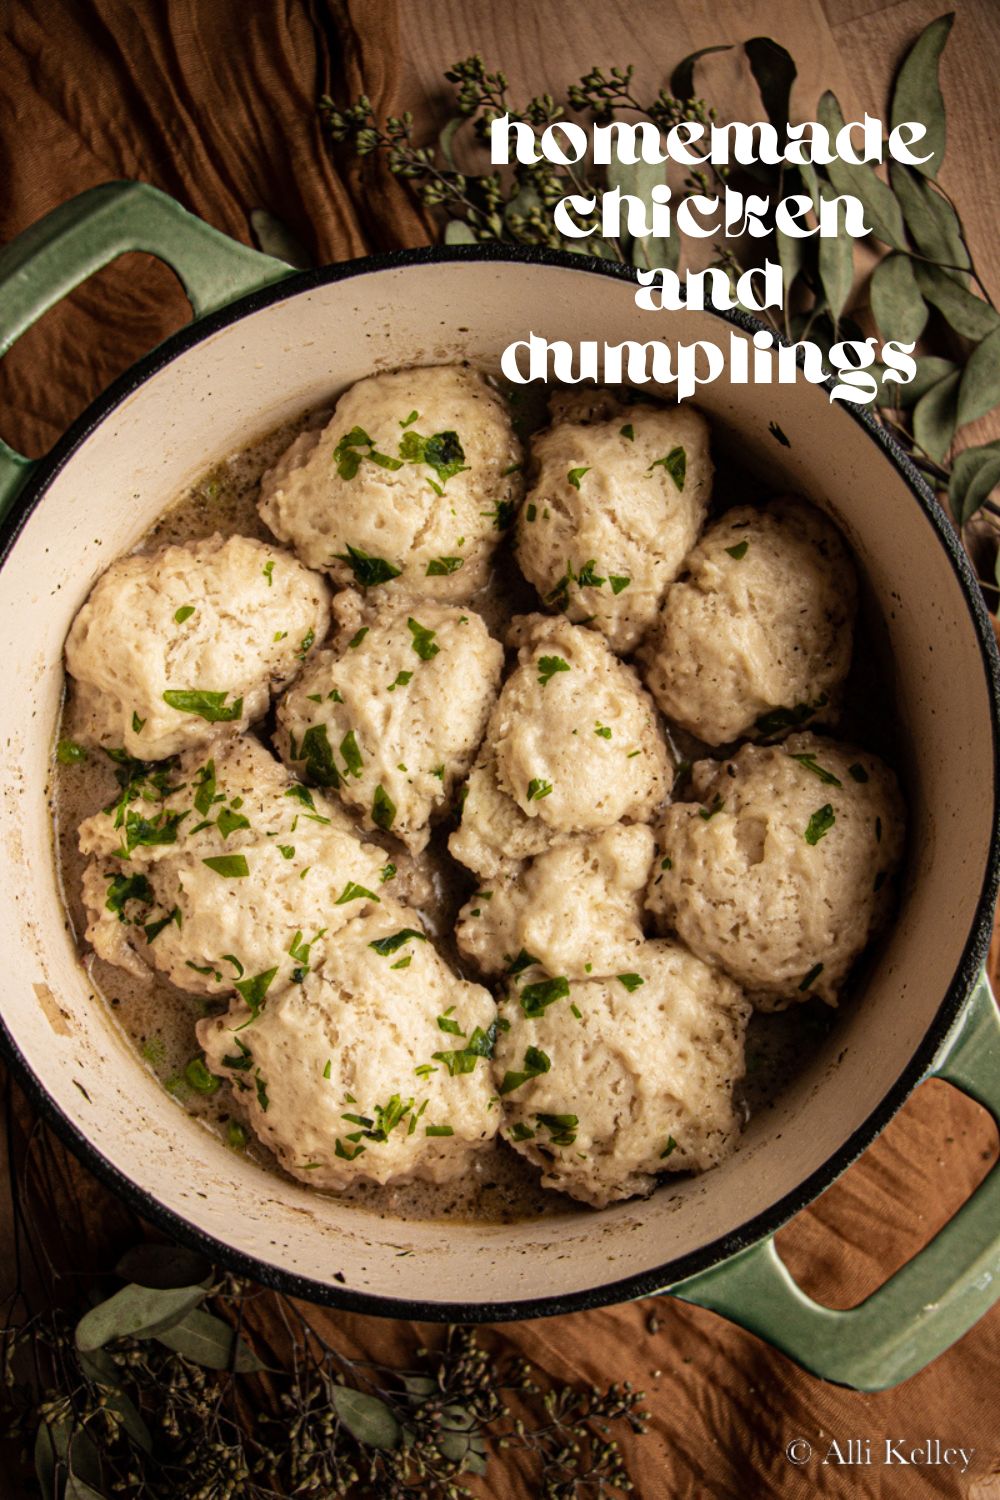 This easy chicken and dumplings recipe is totally homemade and is sure to become a family favorite. Packed with flavor, juicy meat, and tender veggies!